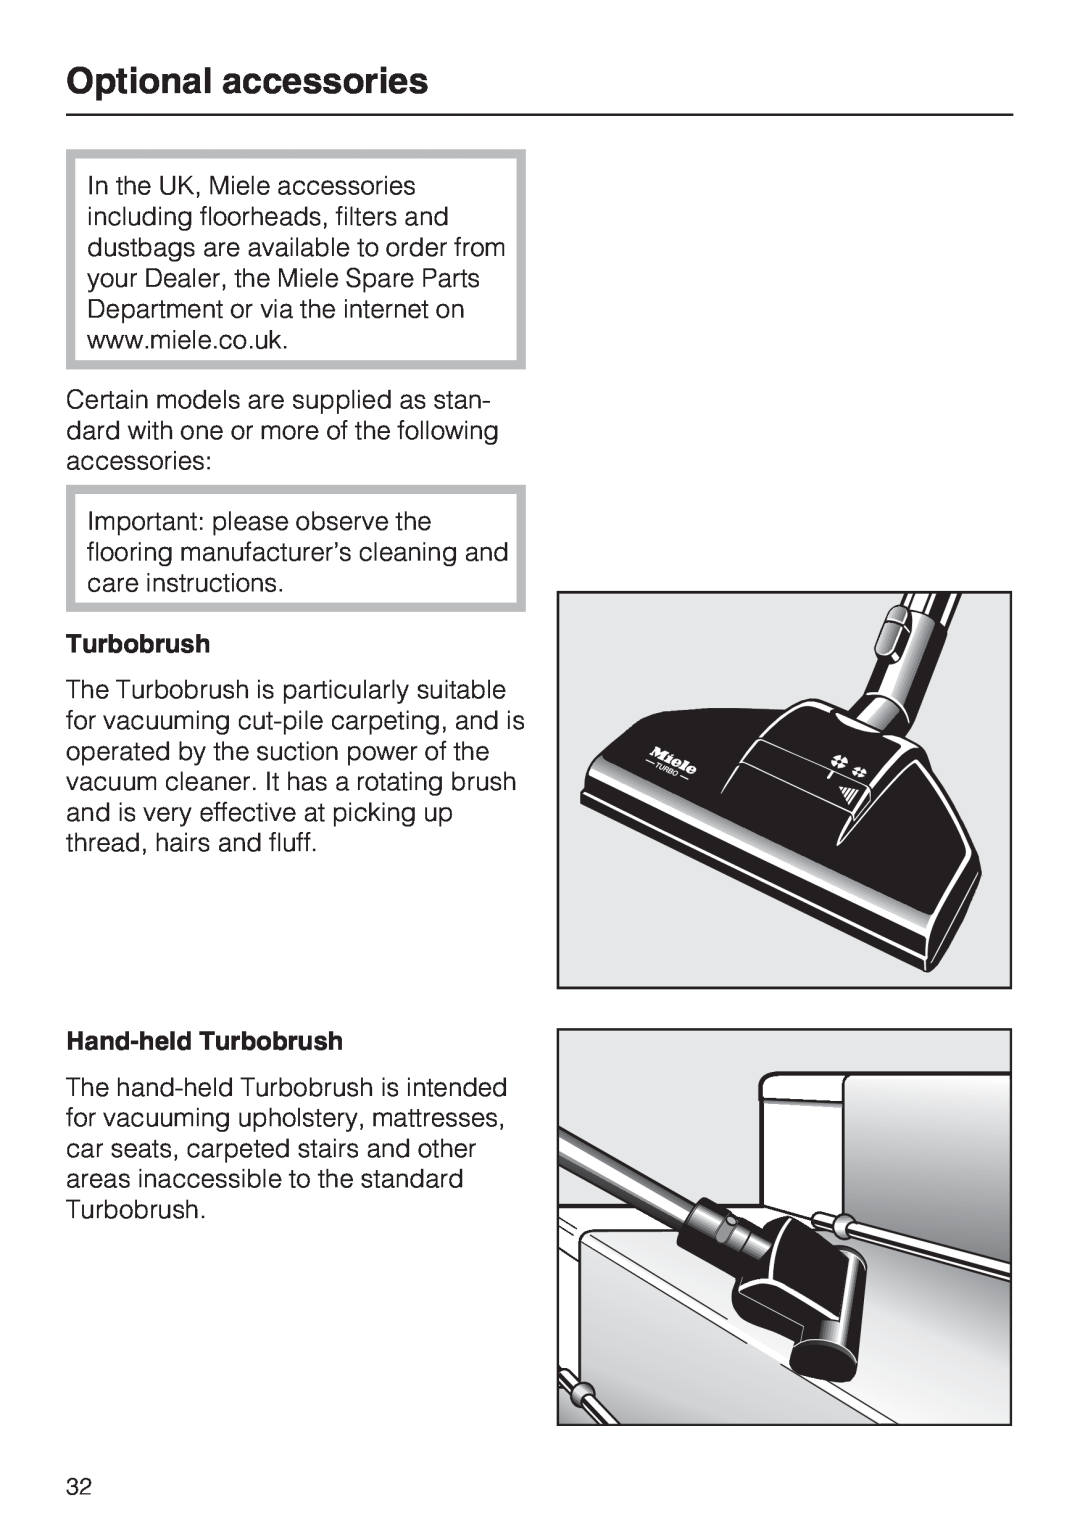 Miele S 4000 Series manual Optional accessories, Hand-heldTurbobrush 